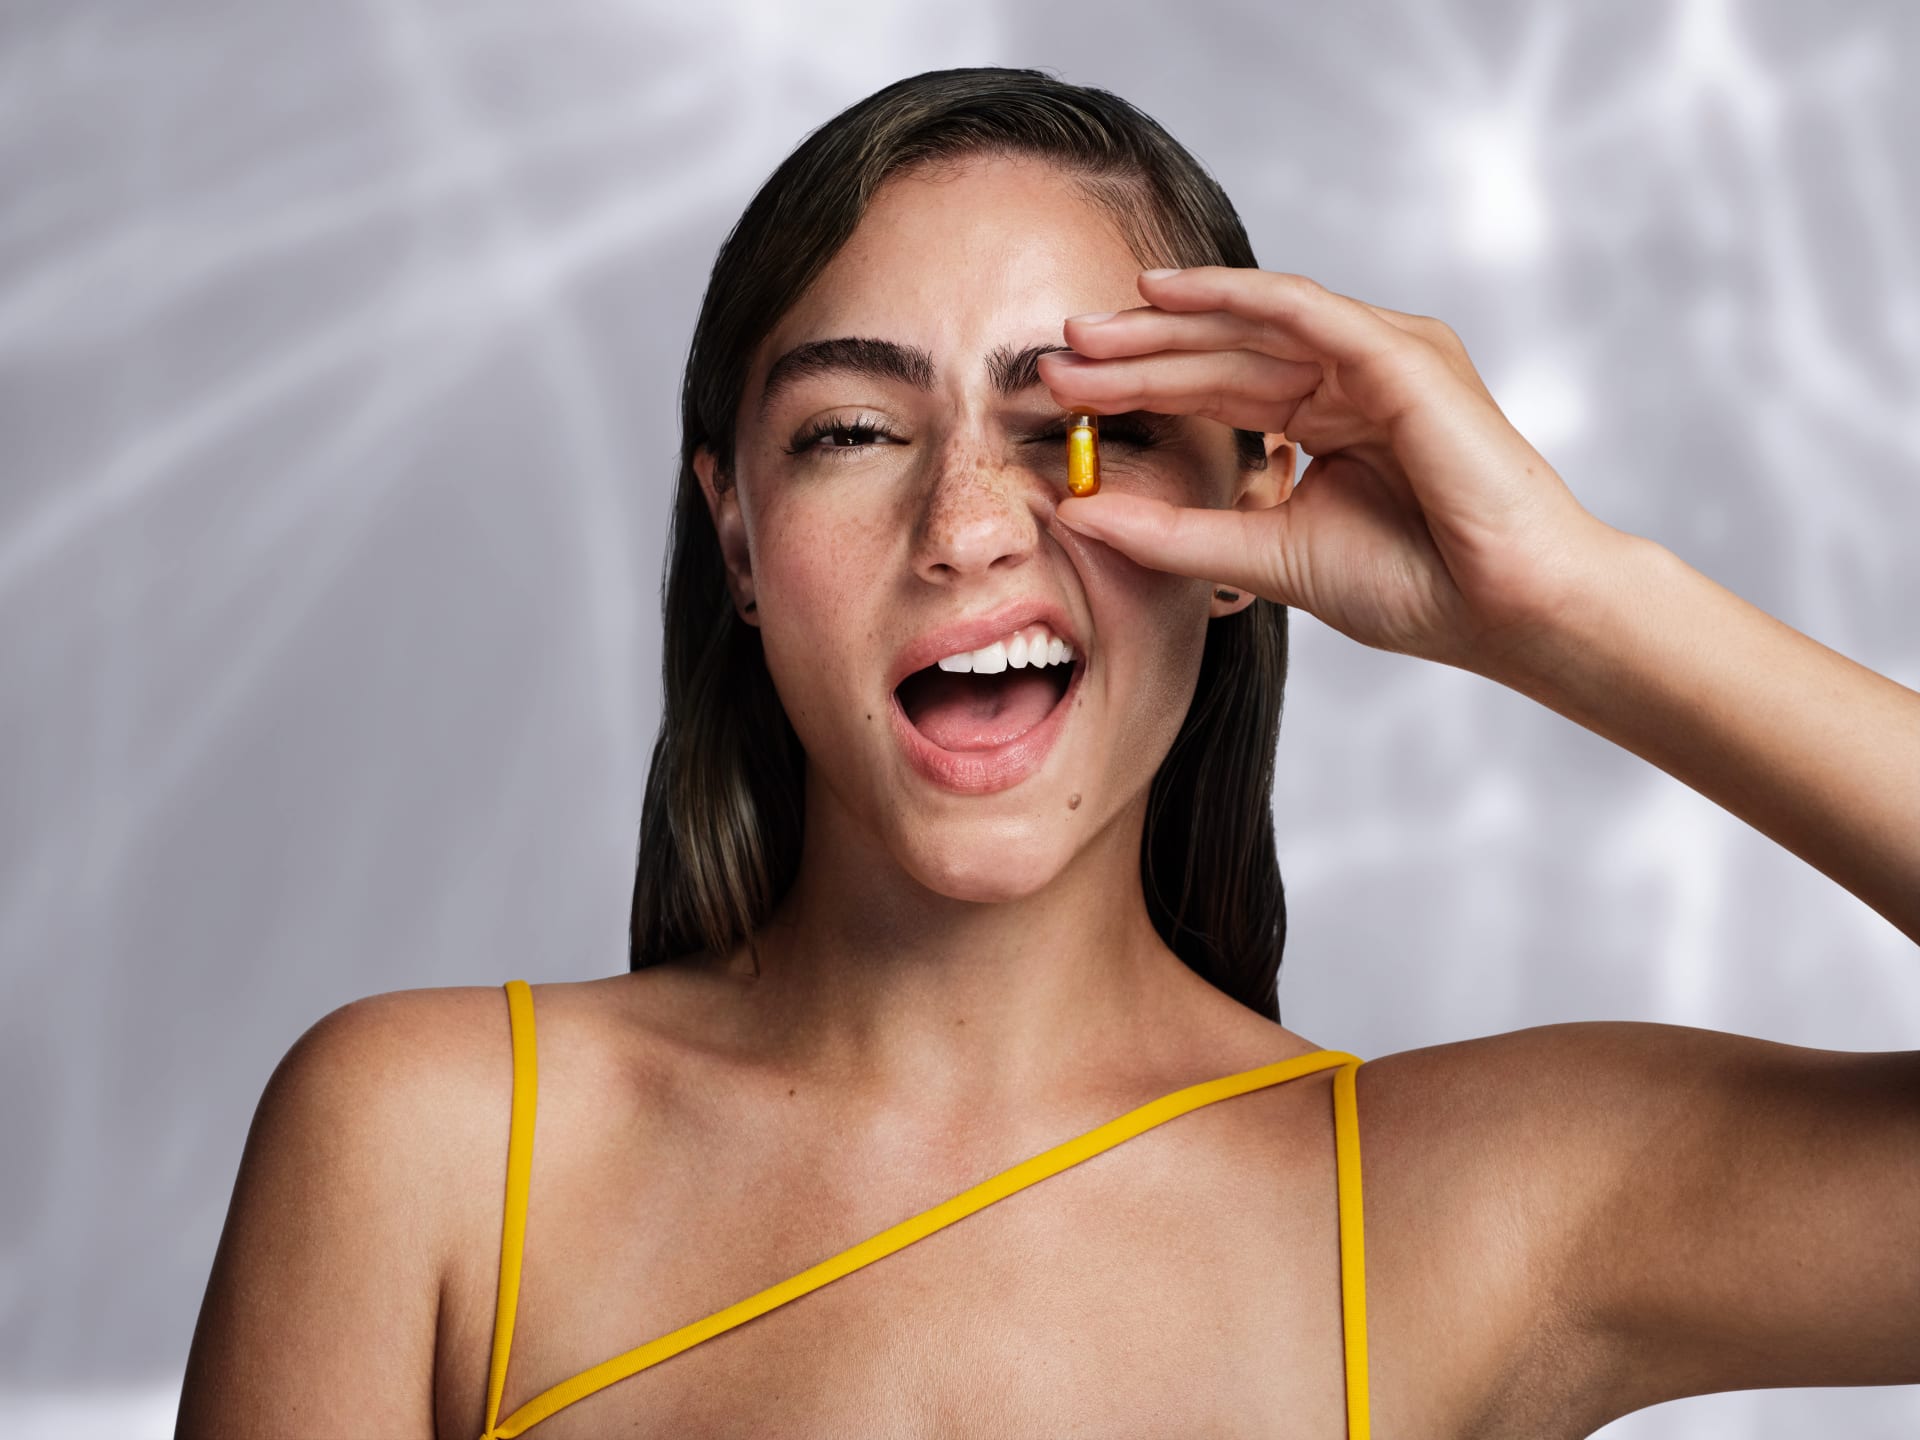 White woman with brown hair and freckles is winking and holding a yellow capsule in front of her left eye She wears a top with thin yellow crisscross strap